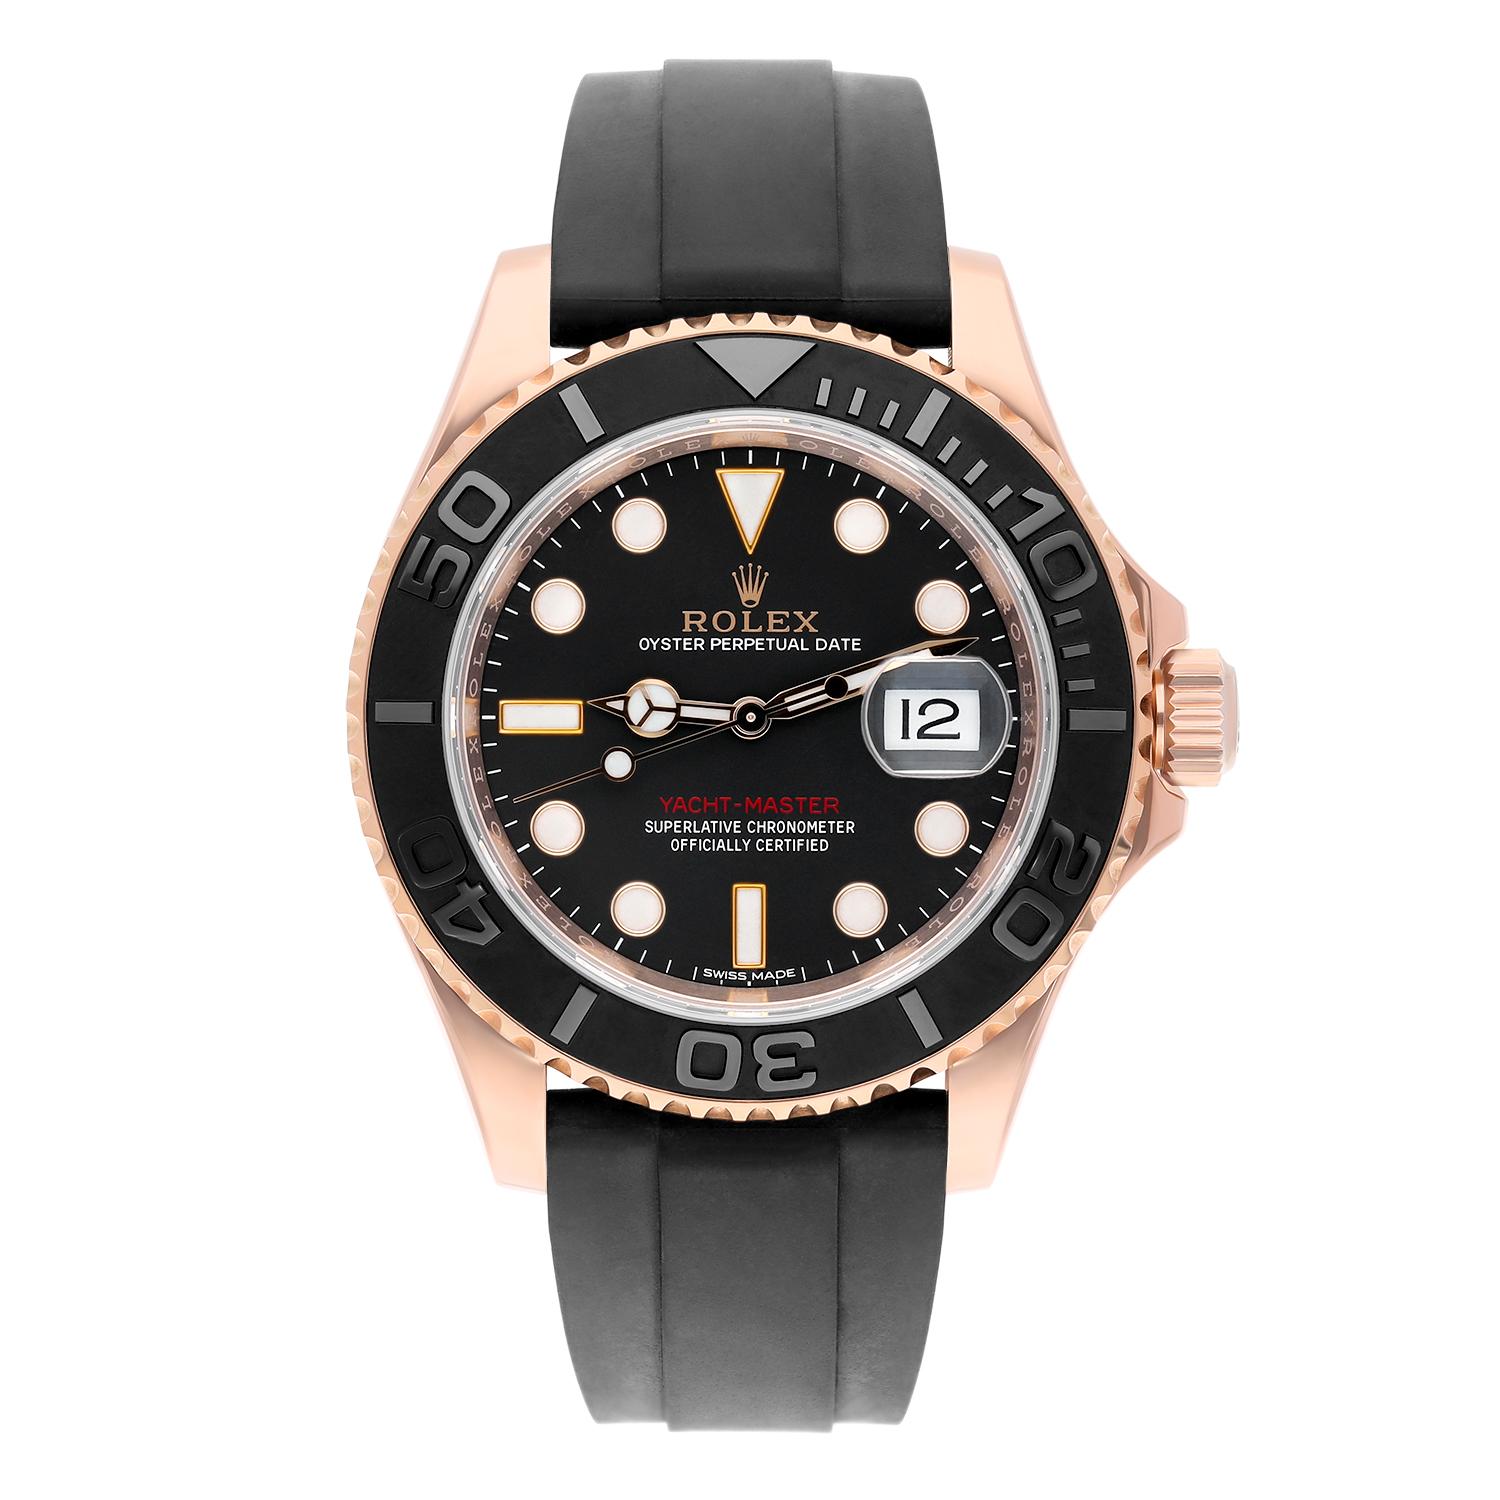 This Rolex Yacht-Master wristwatch is a luxurious timepiece that exudes elegance and style. Crafted from 18K rose gold, it features a polished case finish and a bidirectional rotating bezel that perfectly complements the black dial with luminous